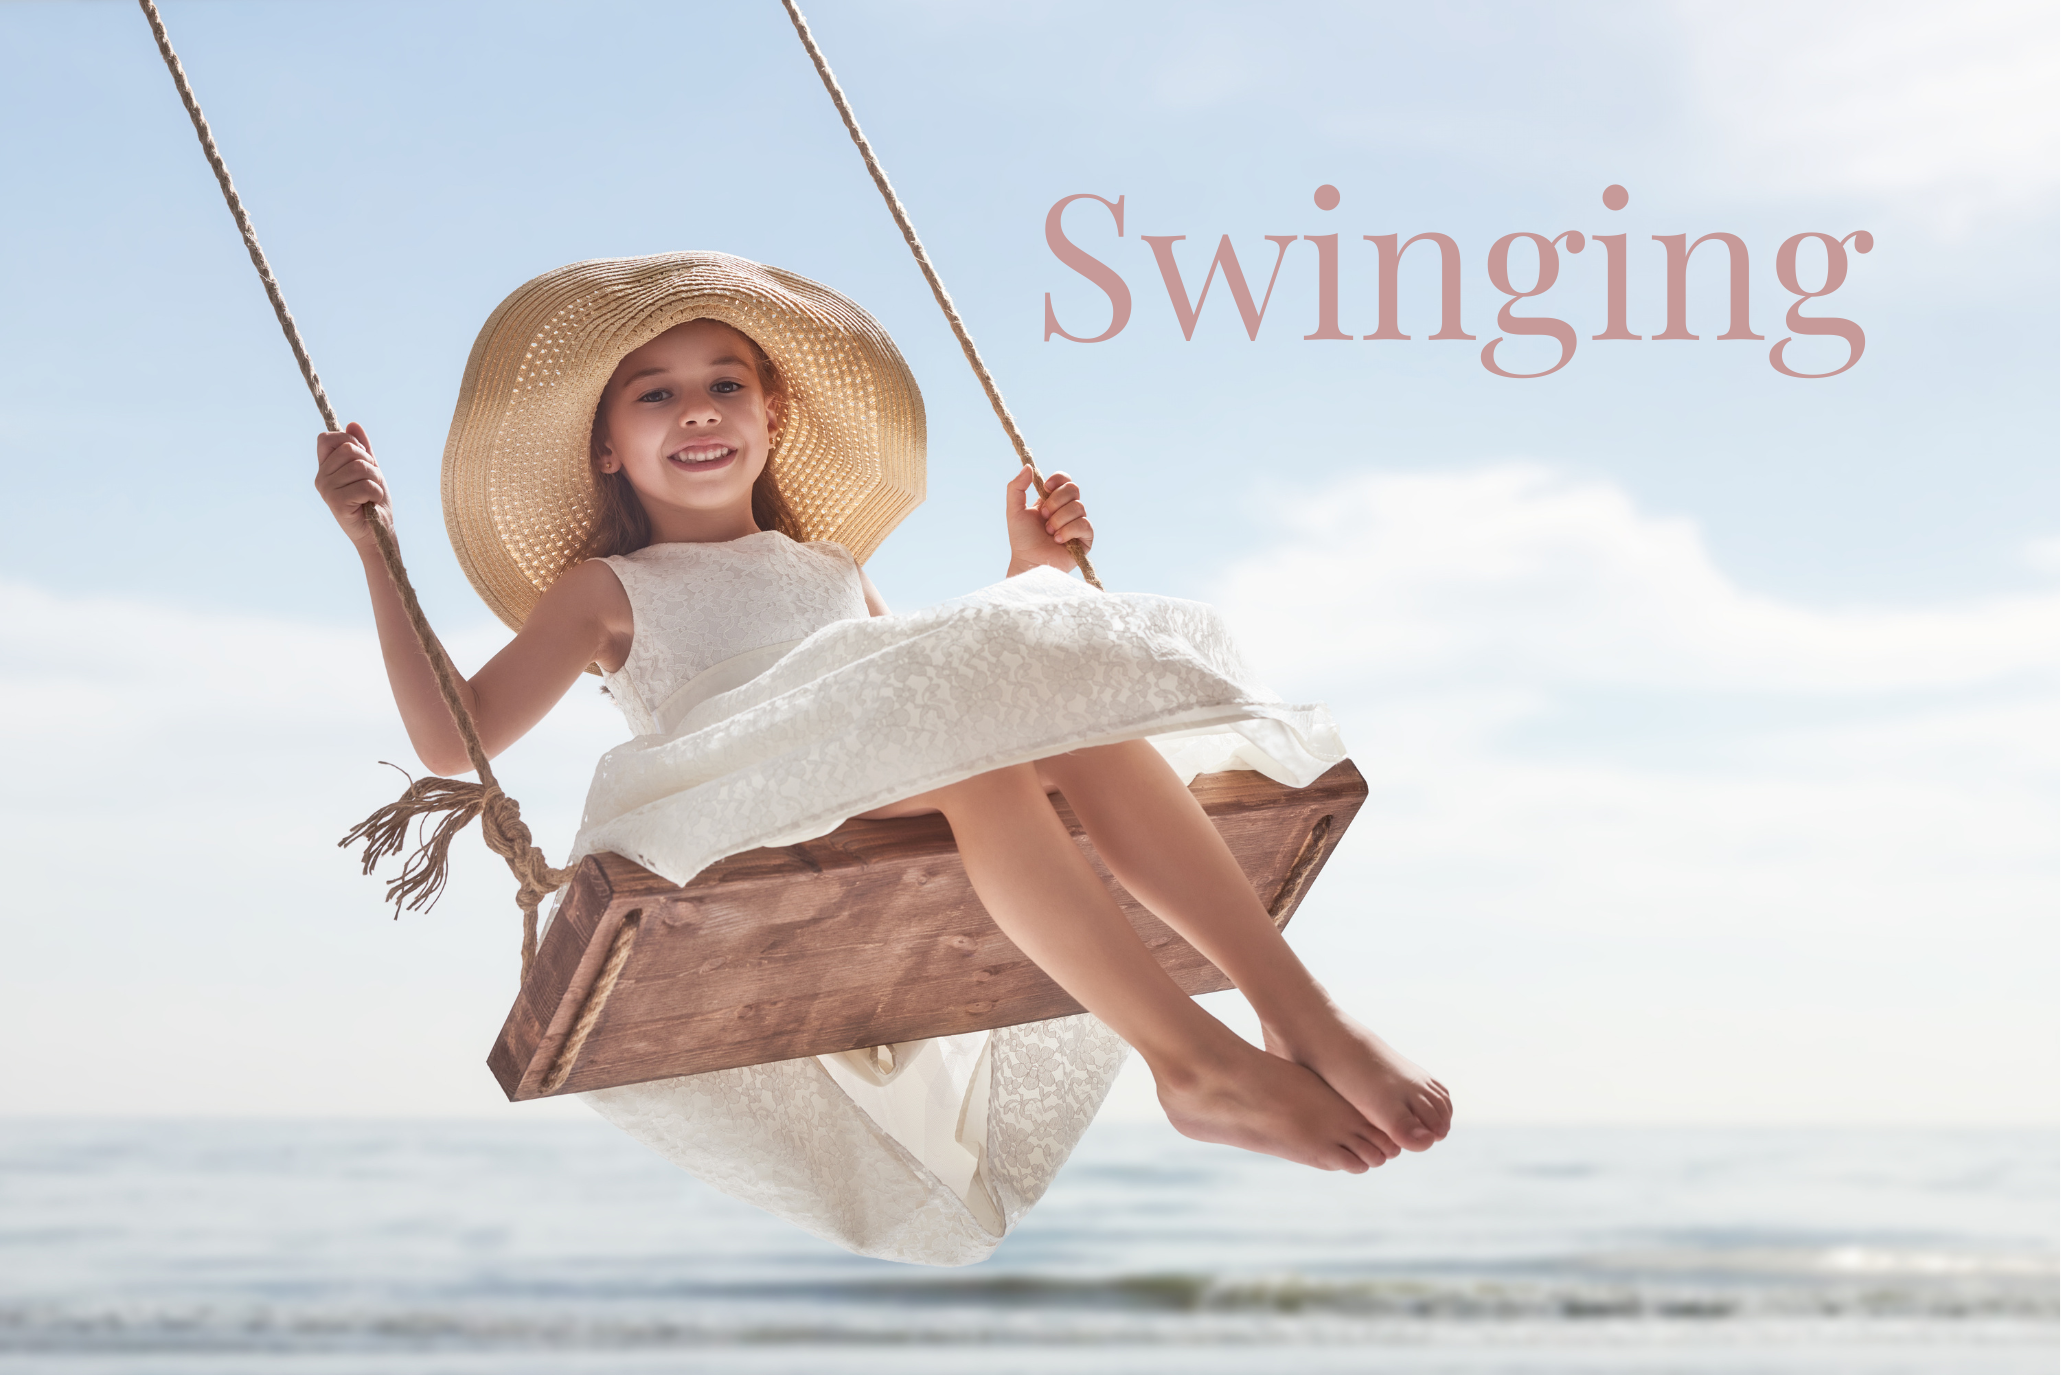 Why Swinging is Important for Child Development